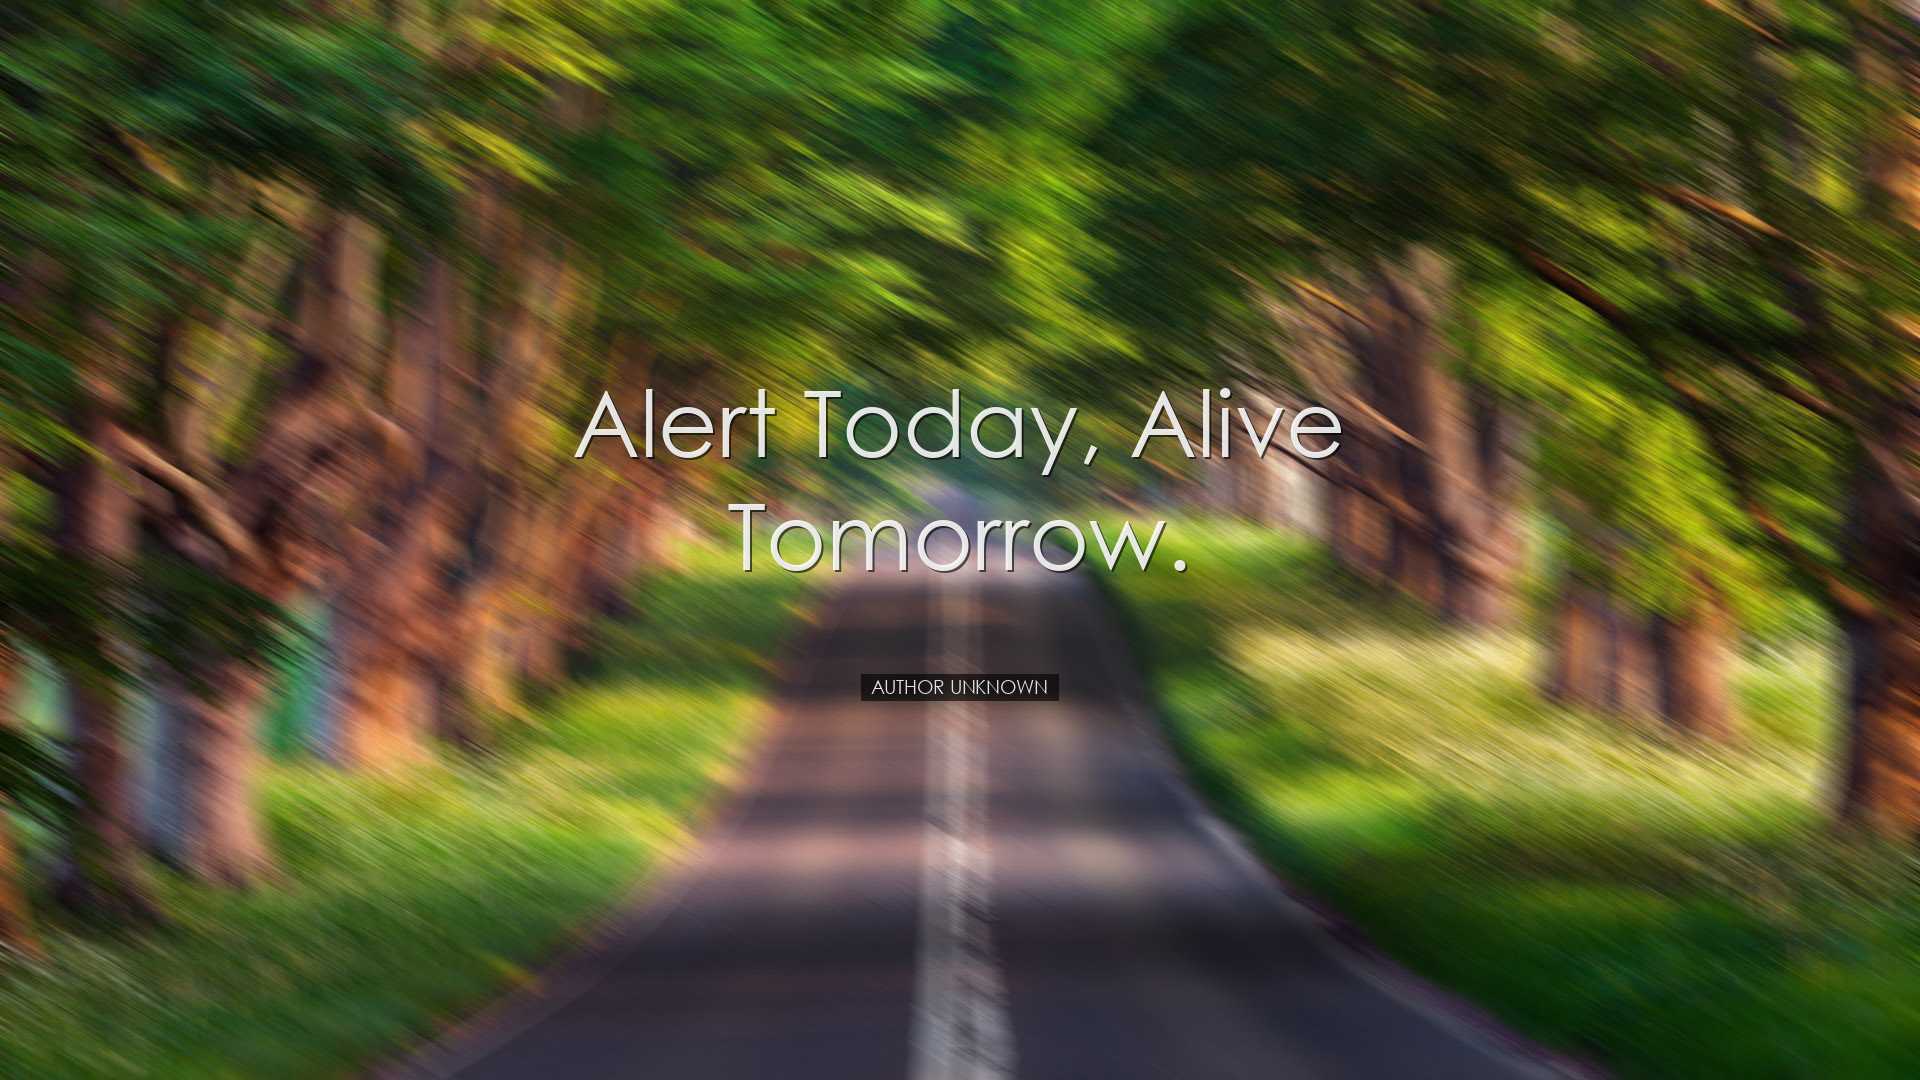 Alert today, alive tomorrow. - Author unknown